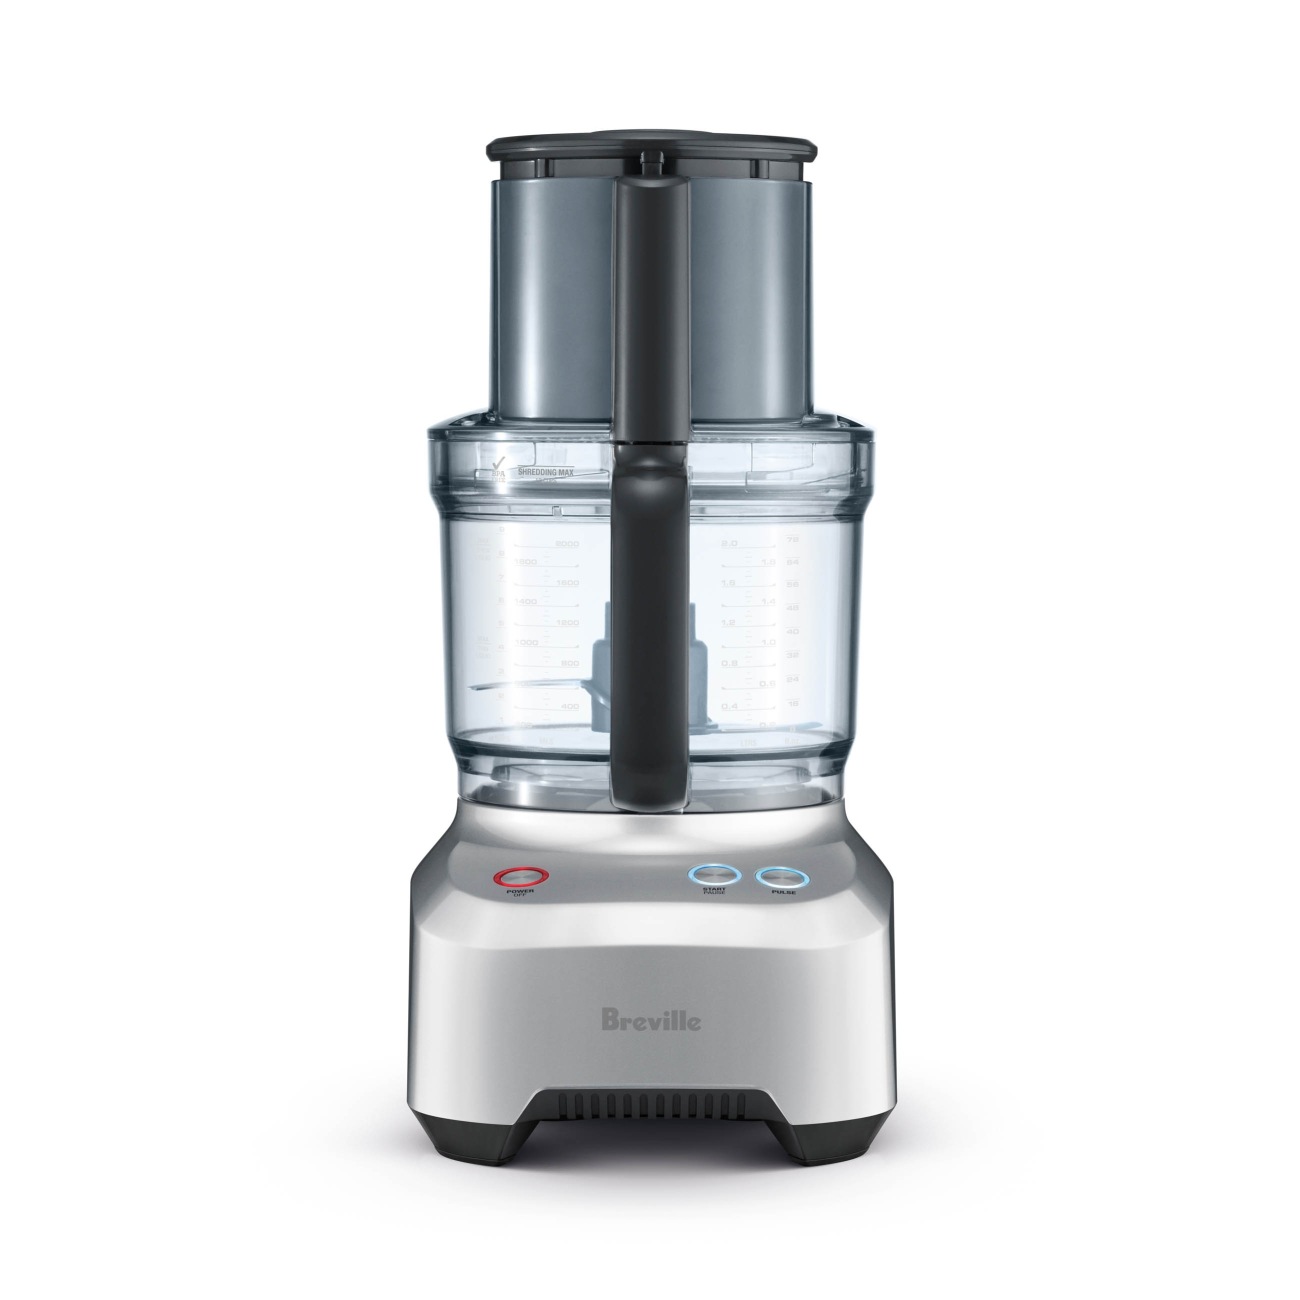 the Breville Sous Chef®  12 Food Processor